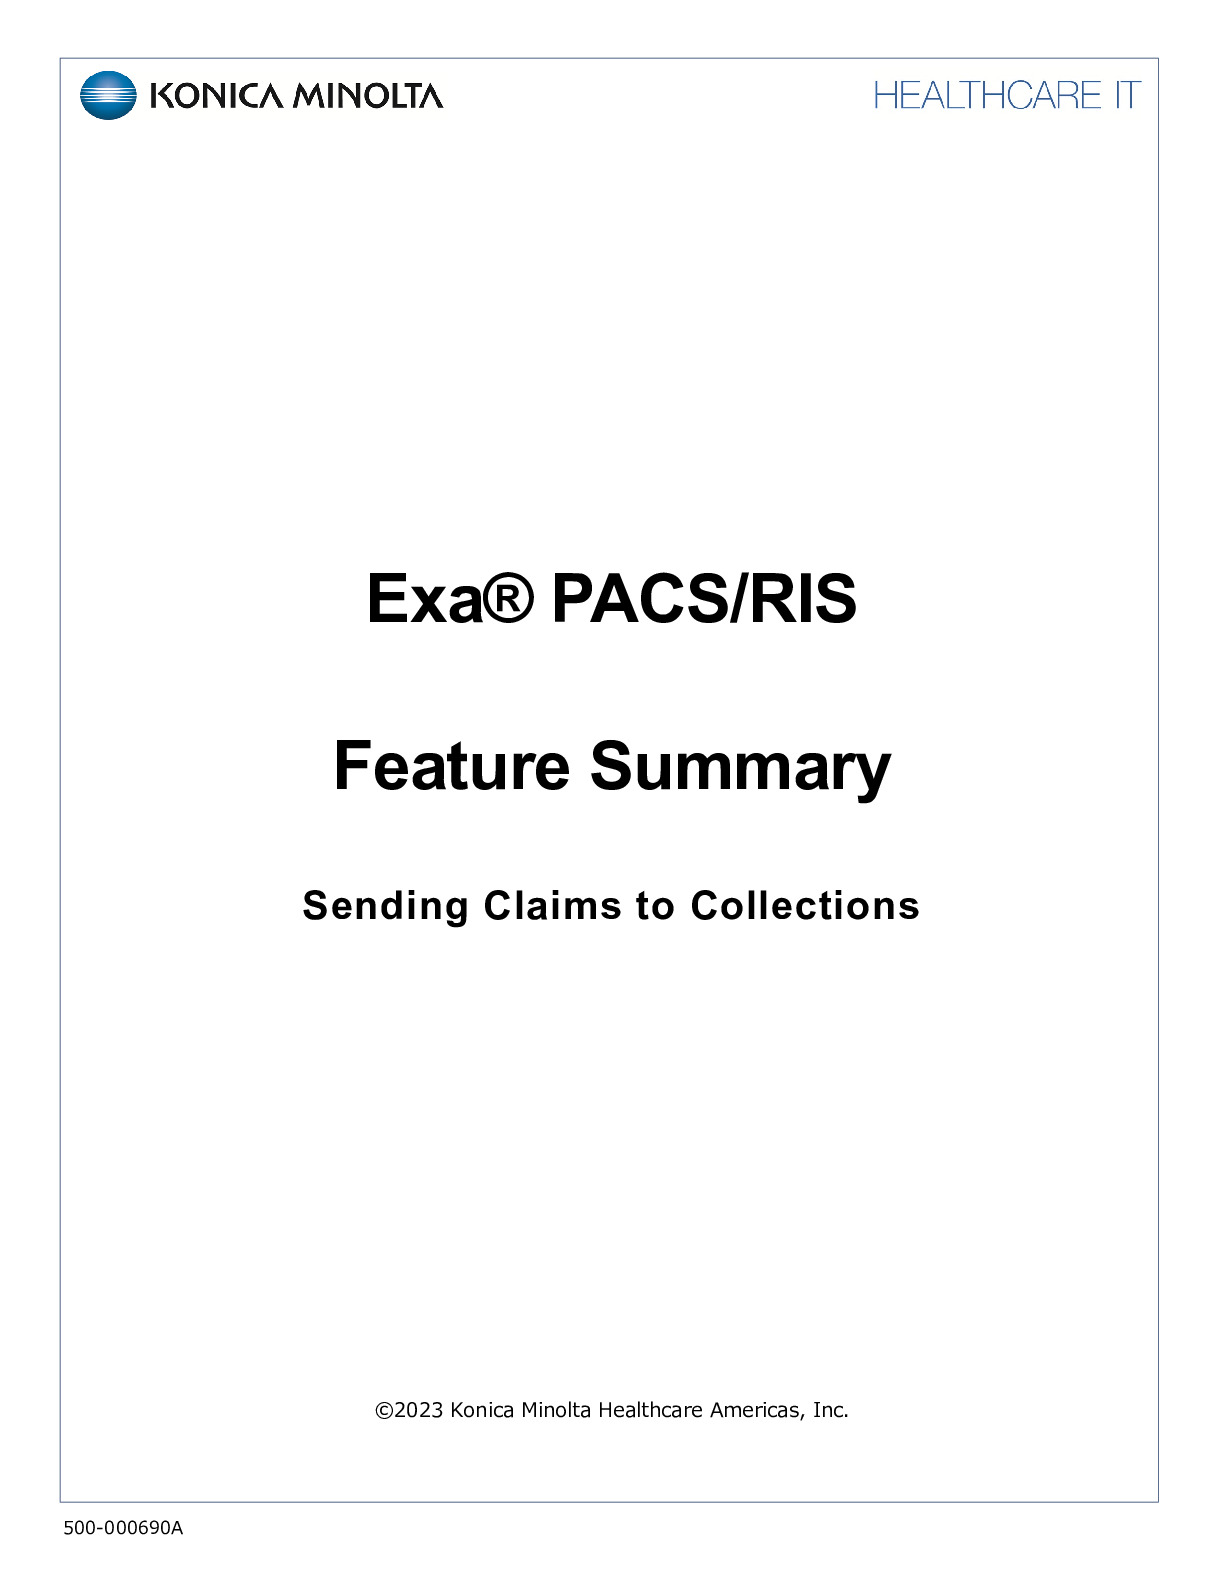 500-000690A EPR_FS_Sending_Claims_to_Collections